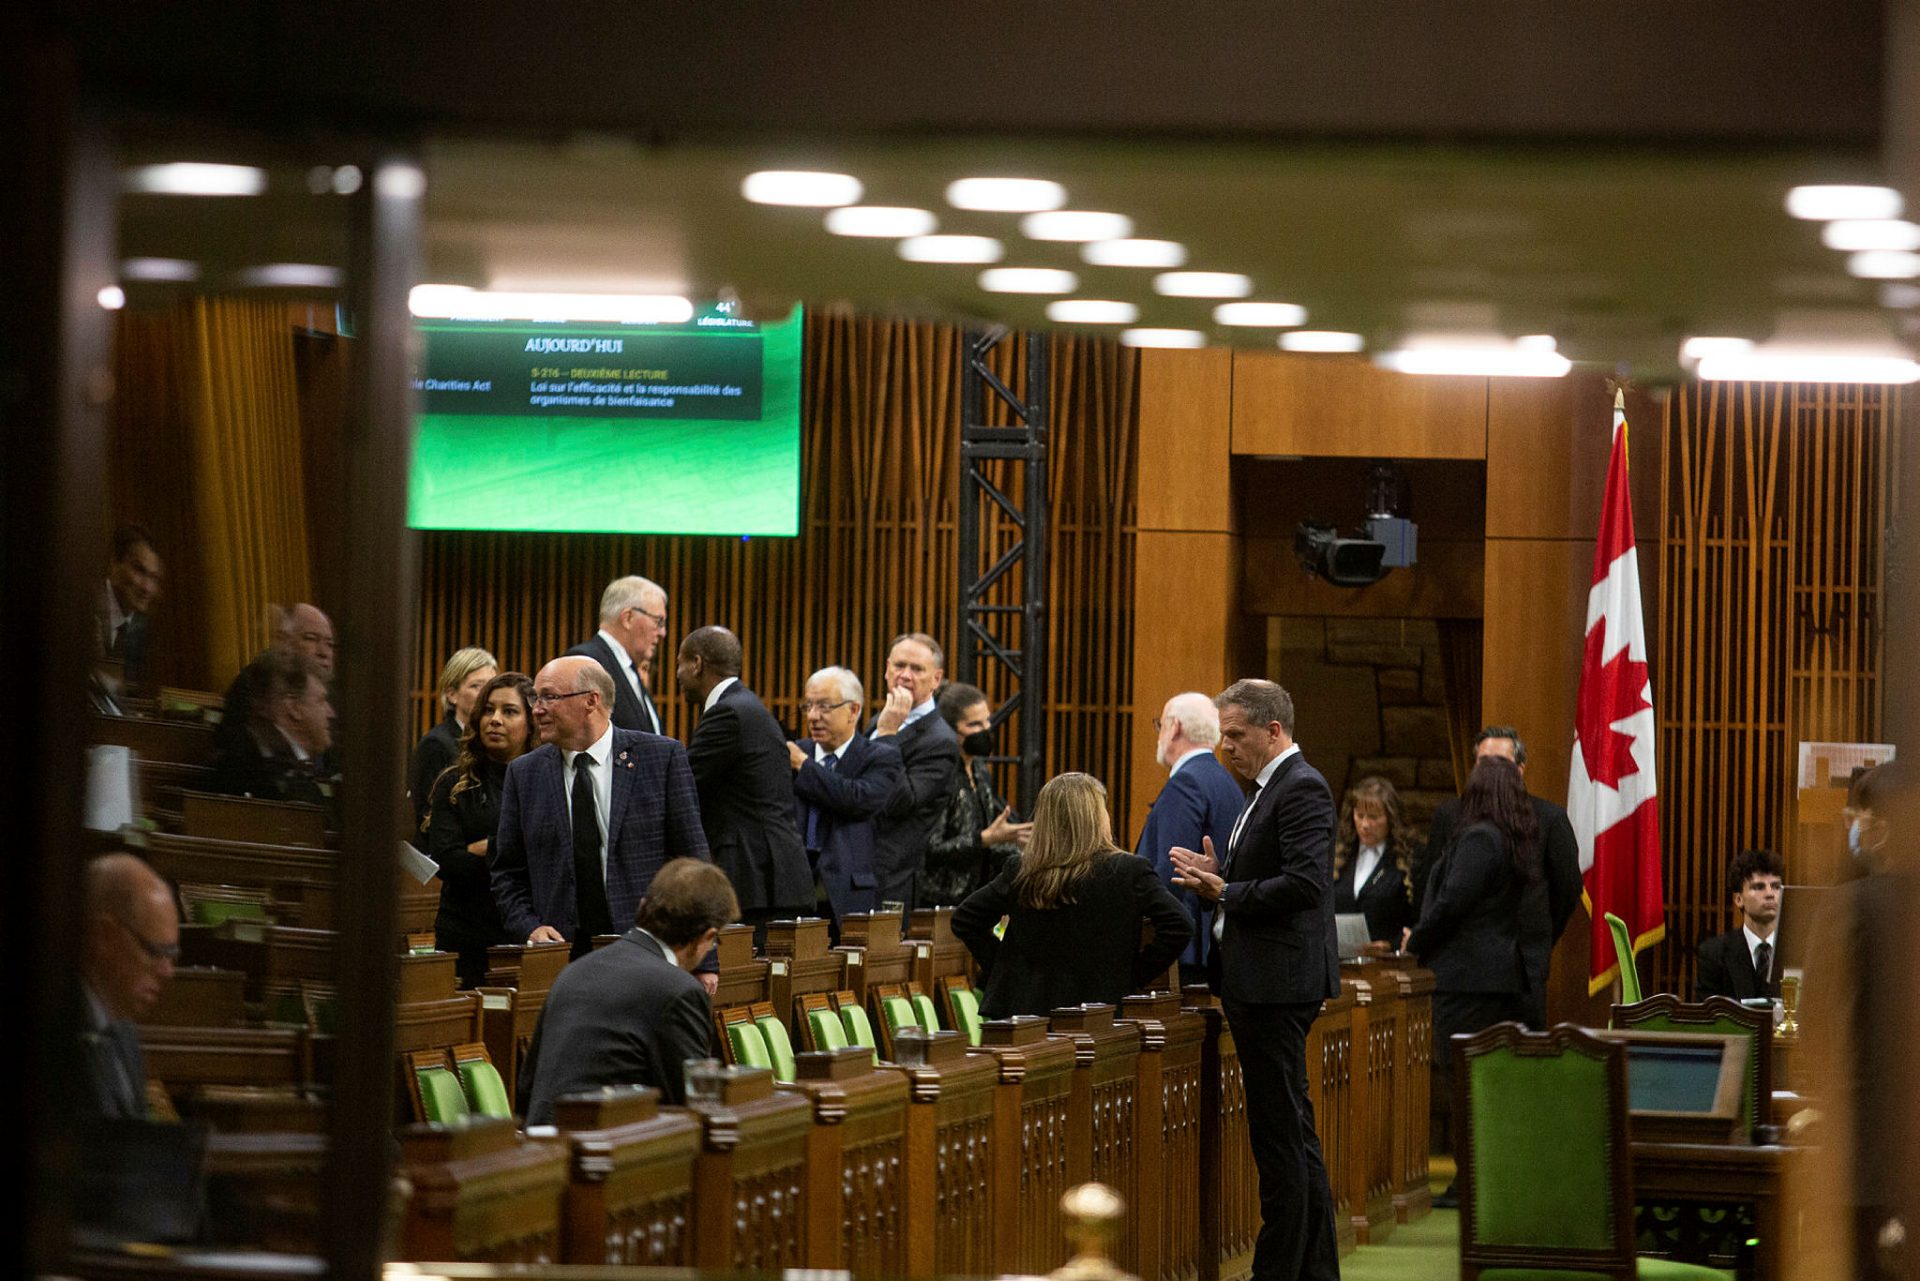 Members of Parliament chat before the House of Commons sits on Sept. 15, 2022, for a special sitting day in commemoration of the passing of Queen Elizabeth II.  The Hill Times photograph by Andrew Meade